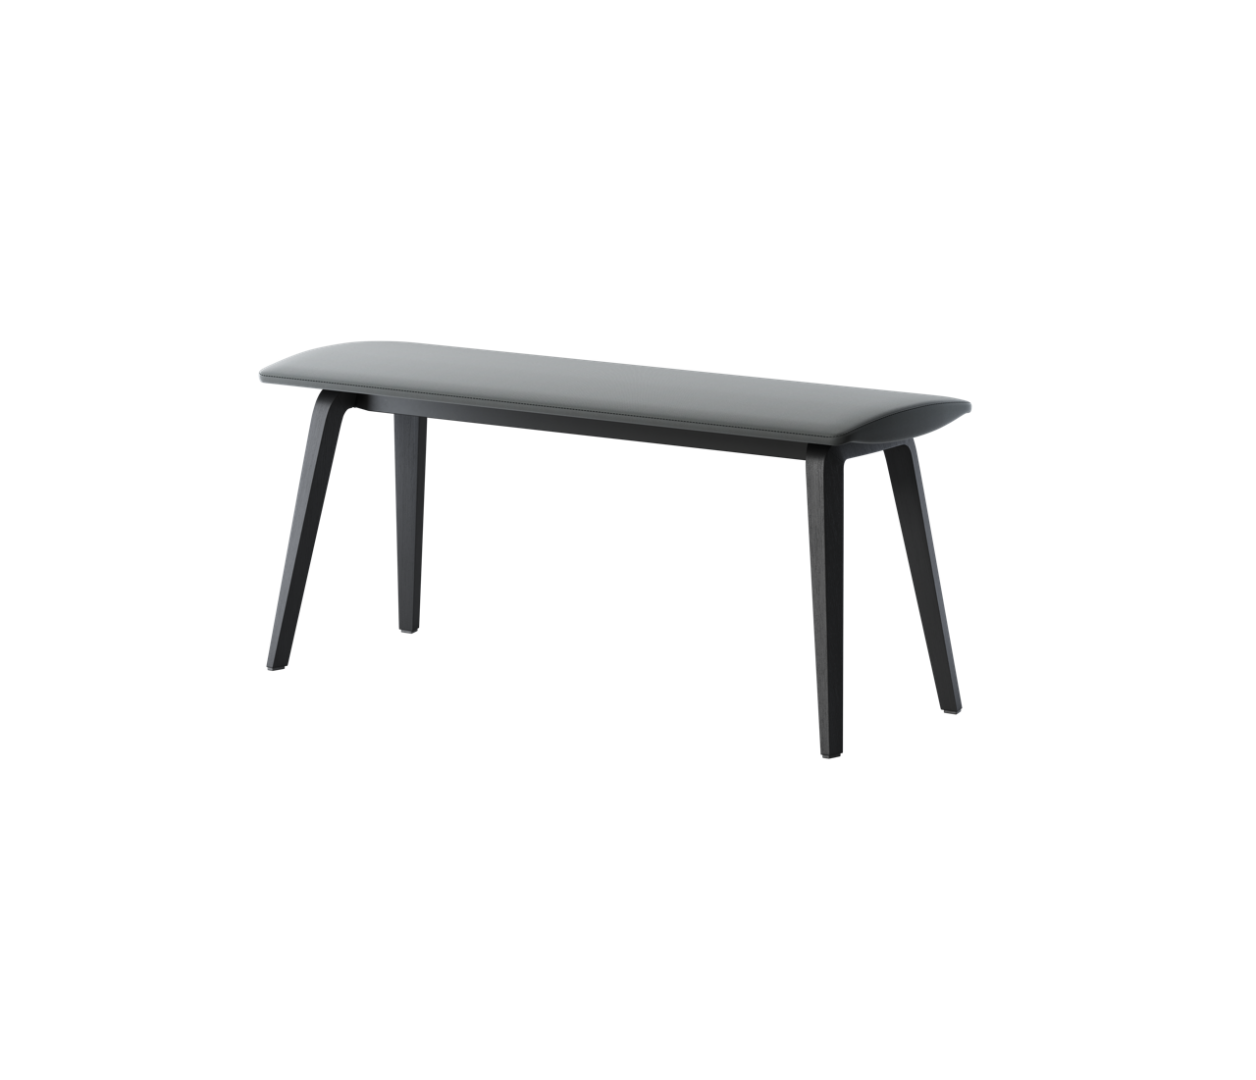 OCEE&FOUR – Stools & Benches – Share Bench – Packshot Image(44) Large